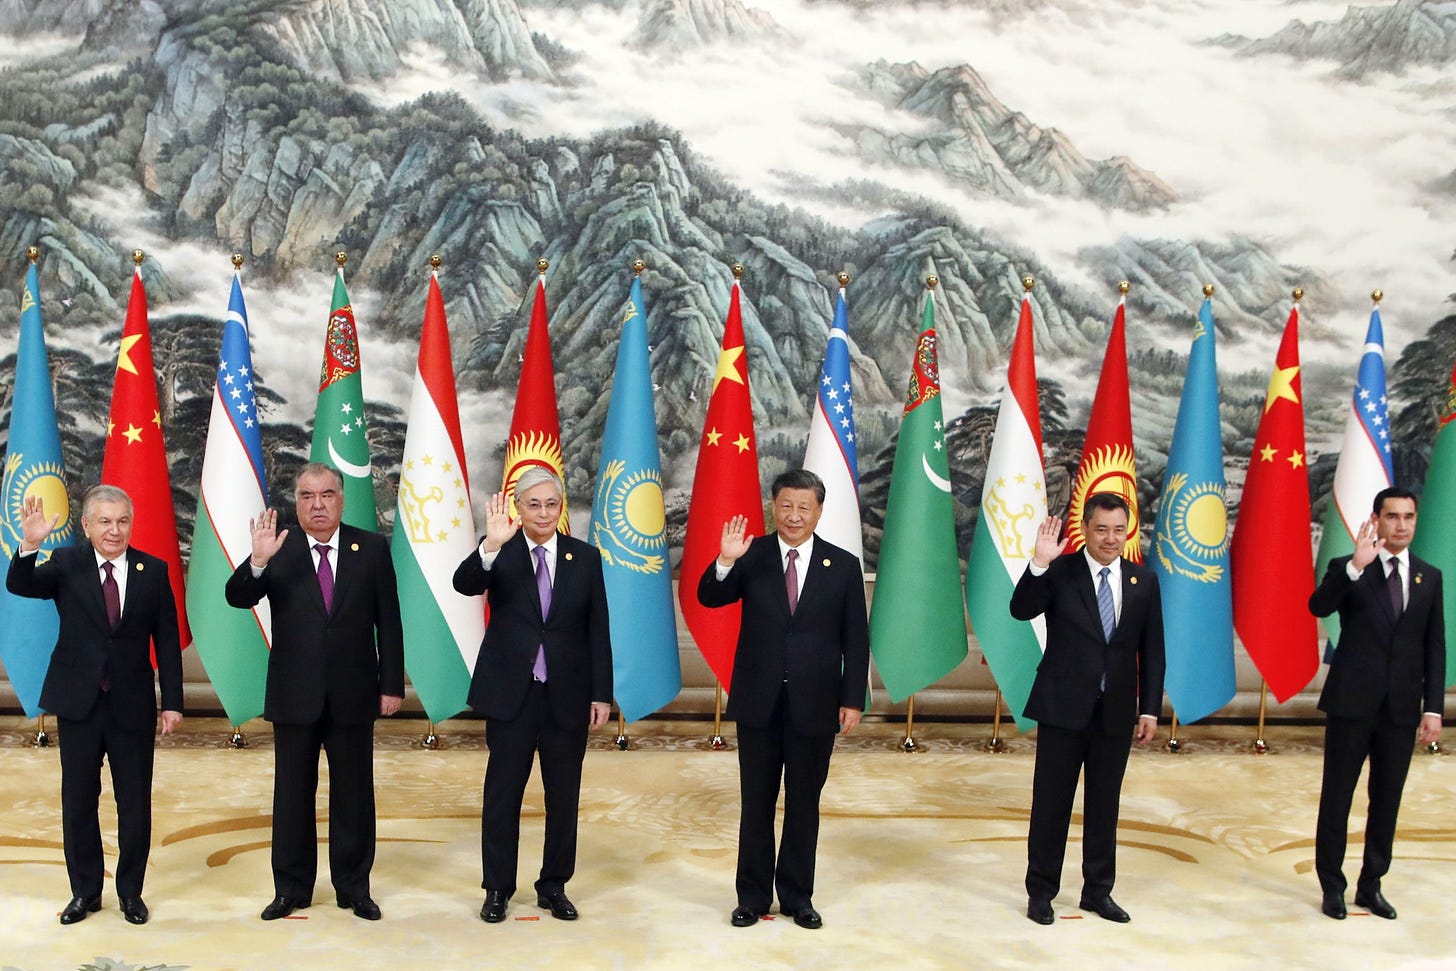 Several men in suits waving in front of flags

Description automatically generated